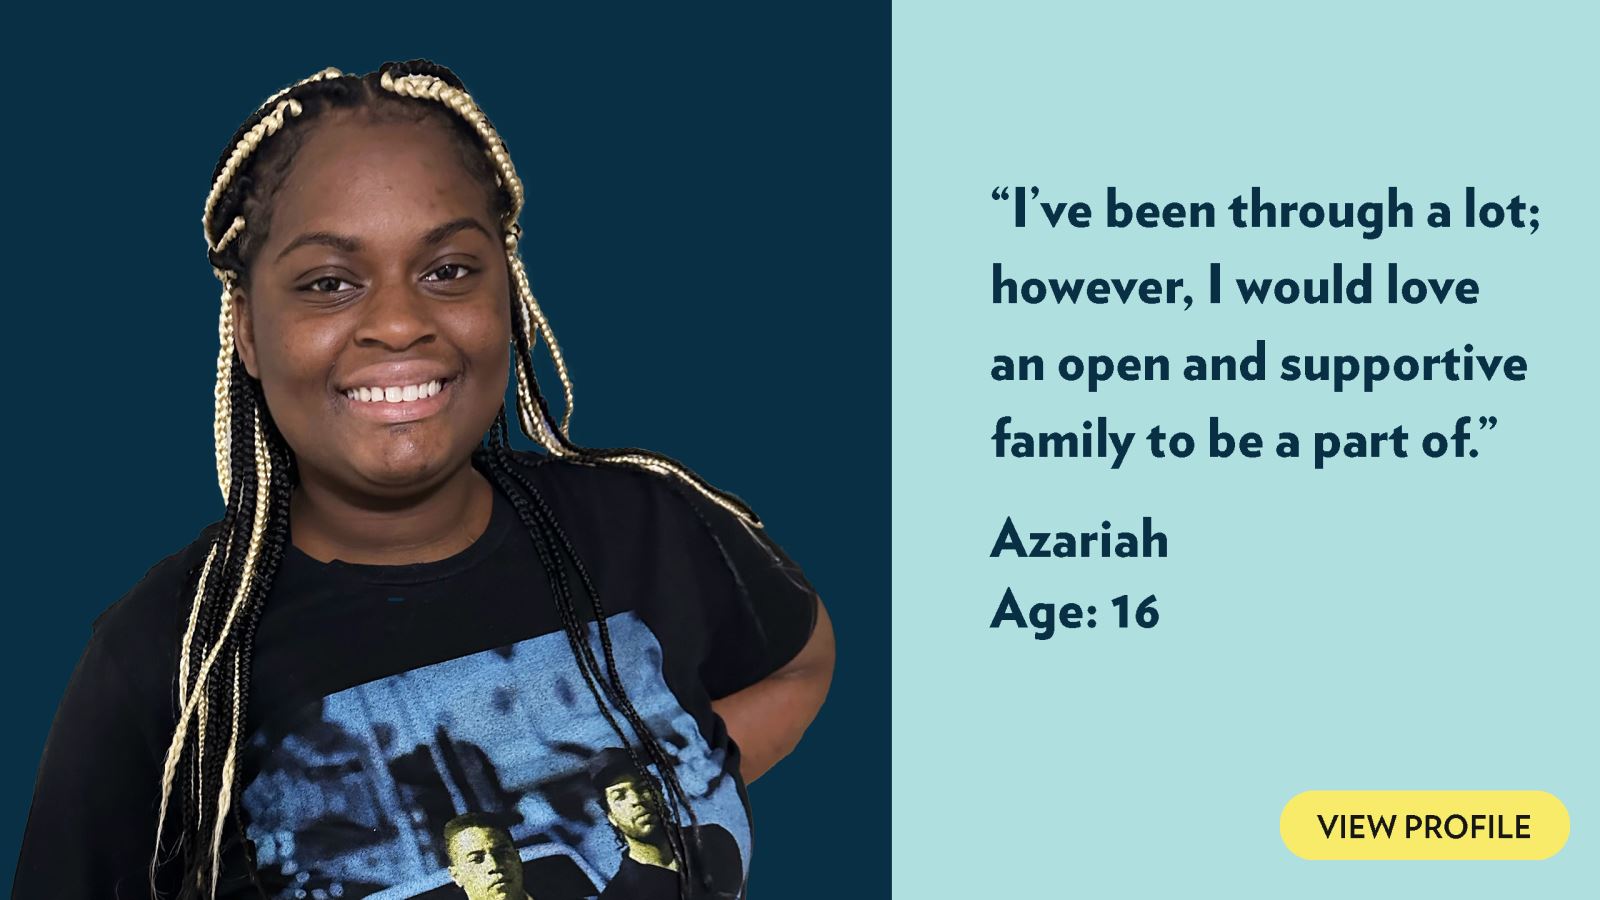 I’ve been through a lot; however, I would love an open and supportive family to be a part of. Azariah, age 16. View profile.